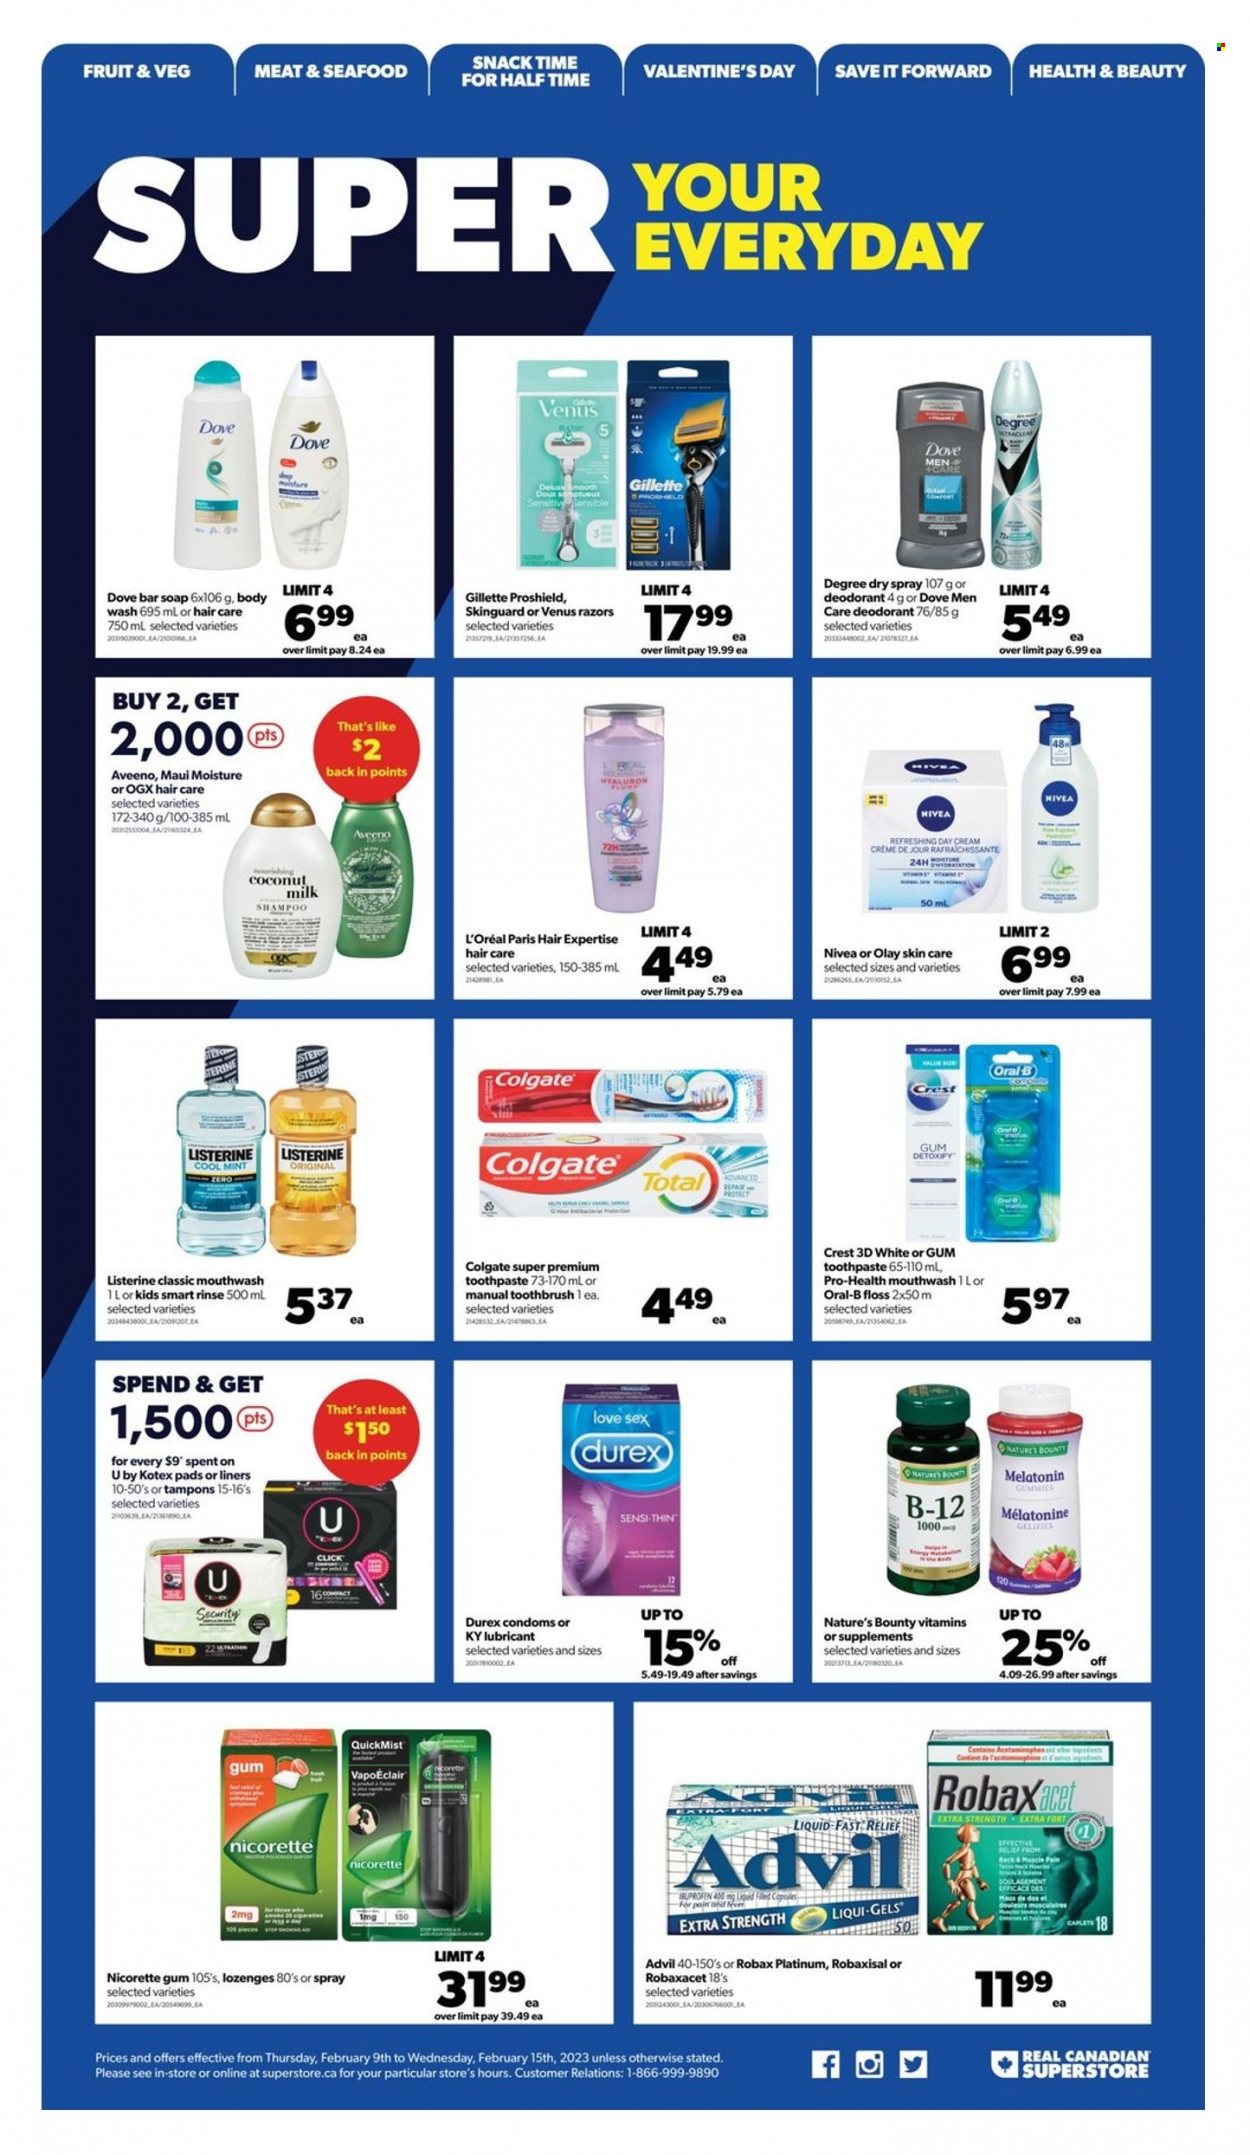 thumbnail - Real Canadian Superstore Flyer - February 09, 2023 - February 15, 2023 - Sales products - seafood, Dove, snack, coconut milk, L'Or, Aveeno, Nivea, body wash, soap bar, soap, toothbrush, toothpaste, mouthwash, Crest, sanitary pads, Kotex, Kotex pads, tampons, day cream, Gillette, L’Oréal, Olay, OGX, Maui Moisture, anti-perspirant, Venus, lubricant, Melatonin, Nature's Bounty, Nicorette, Ibuprofen, Advil Rapid, Nicorette Gum, Colgate, Listerine, shampoo, Oral-B, deodorant. Page 18.